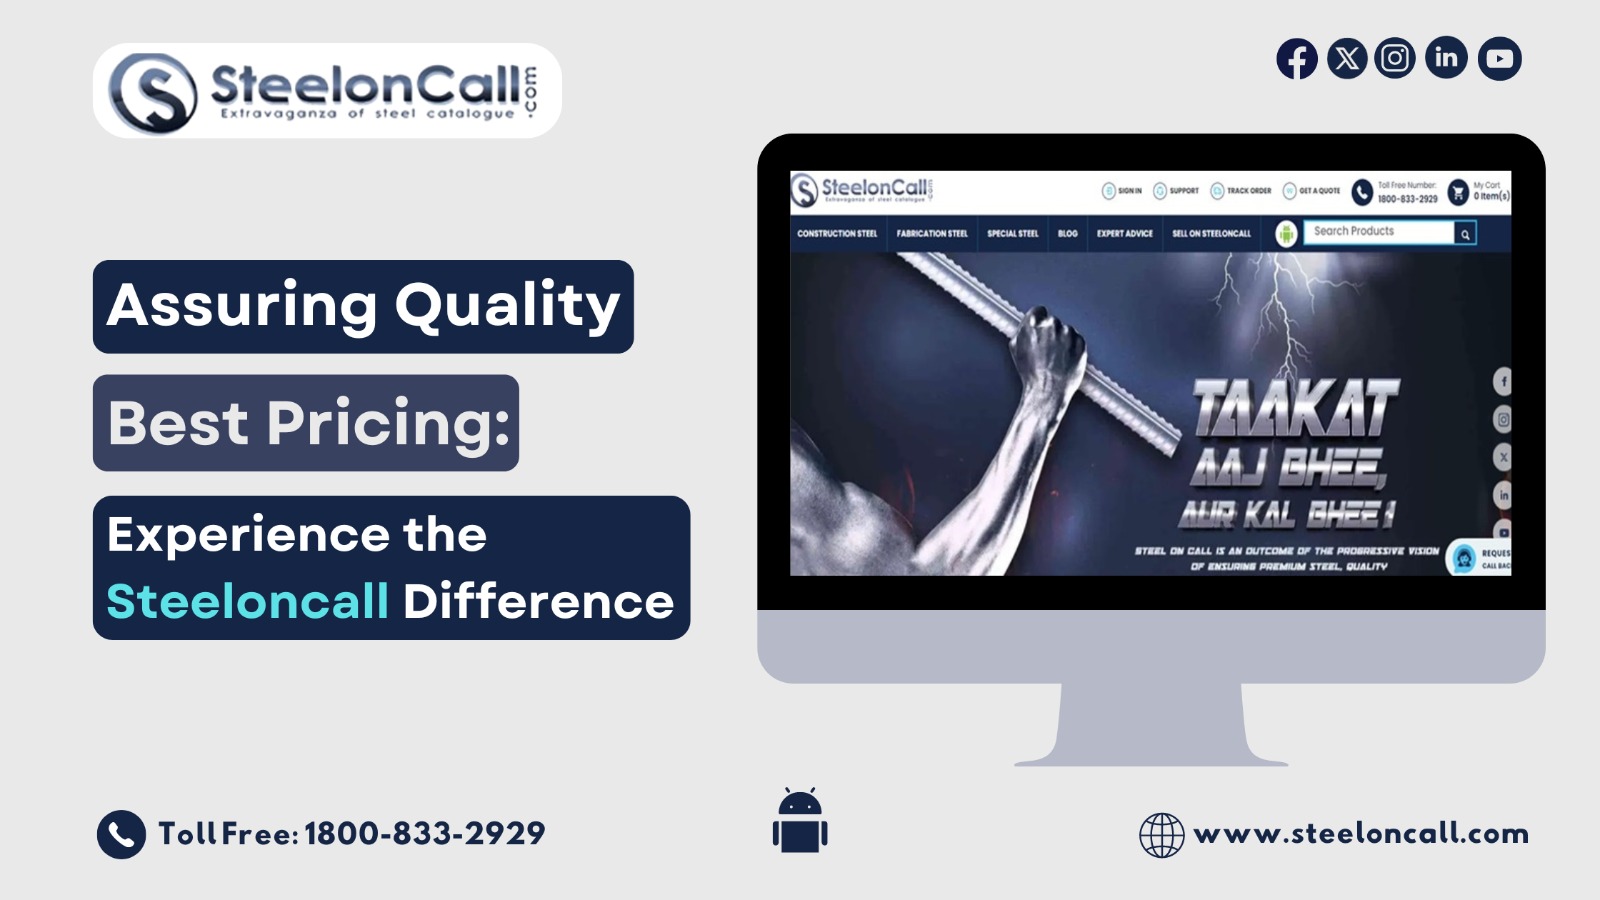 Assuring Quality, Best Pricing: Experience the Steeloncall Difference.